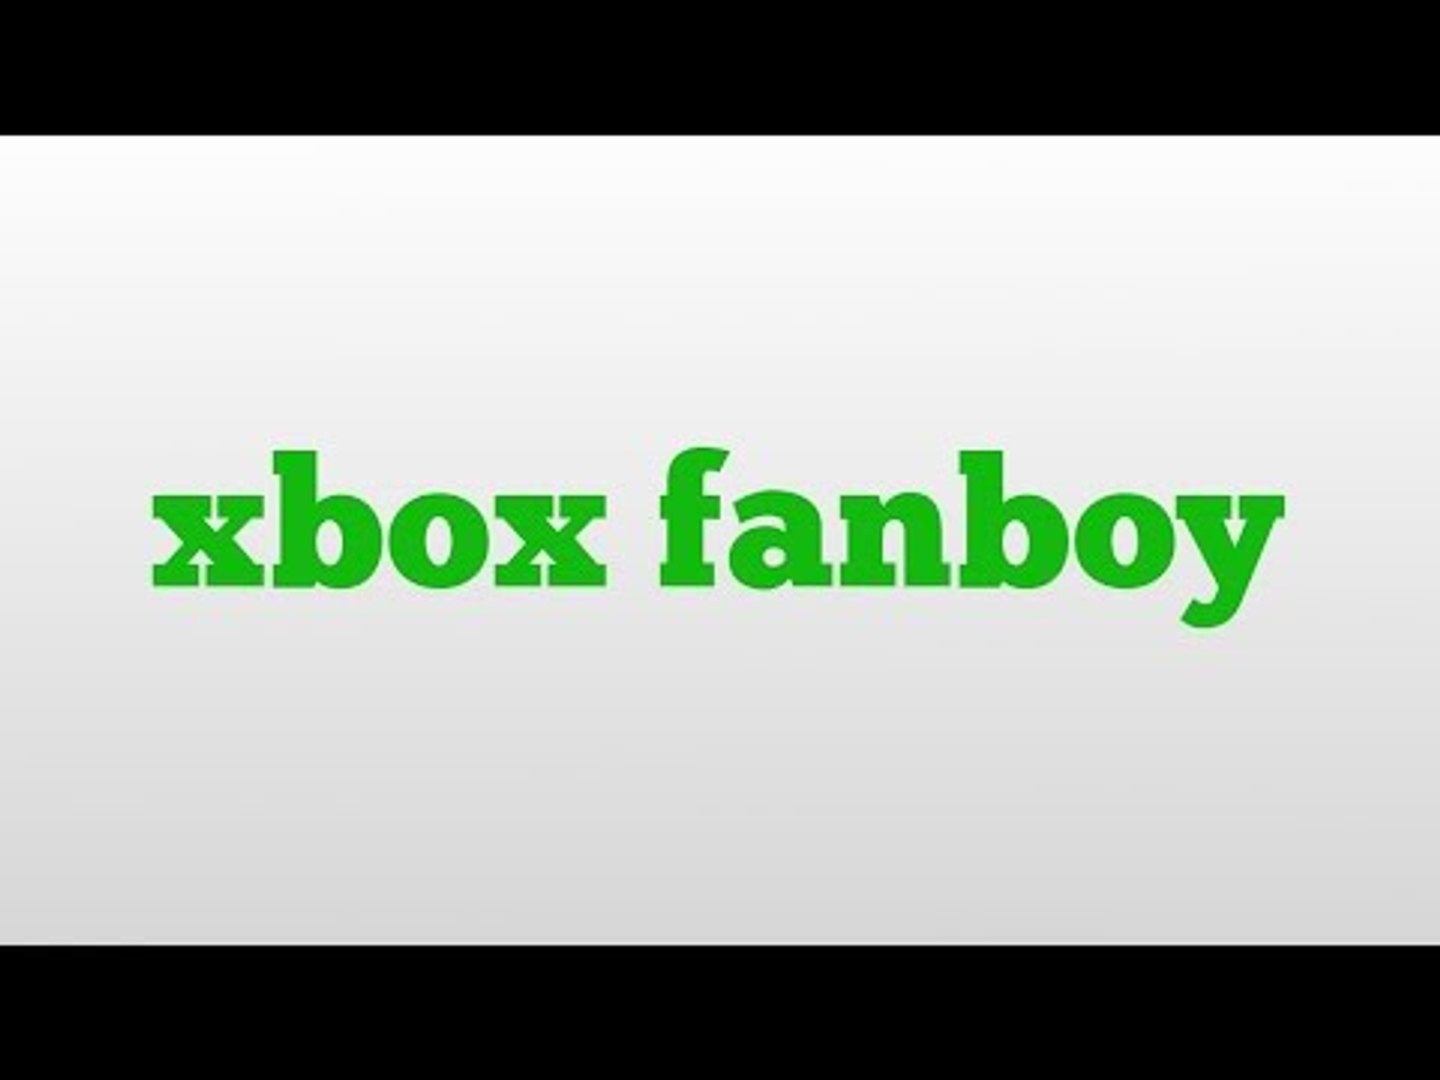 xbox fanboy meaning and pronunciation - video Dailymotion